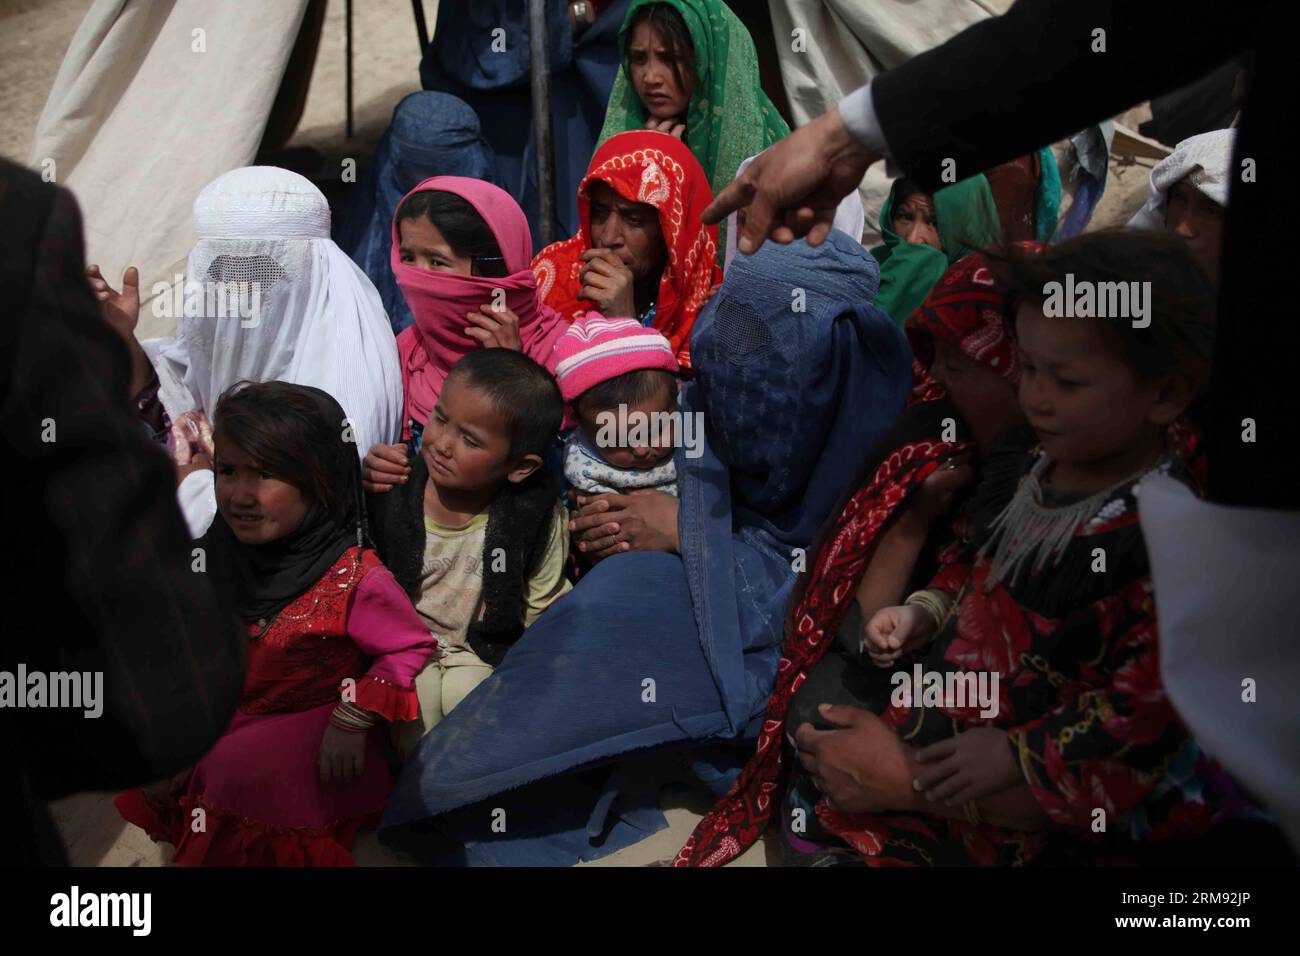 (140505) -- BADAKHSHAN, May 4, 2014 (Xinhua) -- Afghan women with their children wait to receive relief food after landside in Badakhshan province, northern Afghanistan, May 4, 2014. The deadly landslide occurred Friday in the mountainous province of Badakhshan. Although there is no official death toll, provincial governor Shah Waliullah Adeeb told Xinhua that more than 2,500 people might have lost their lives. (Xinhua/Ahmad Massoud) AFGHANISTAN-BADAKHSHAN-LANDSLIDE PUBLICATIONxNOTxINxCHN   Badakhshan May 4 2014 XINHUA Afghan Women With their Children Wait to receive Relief Food After Landside Stock Photo